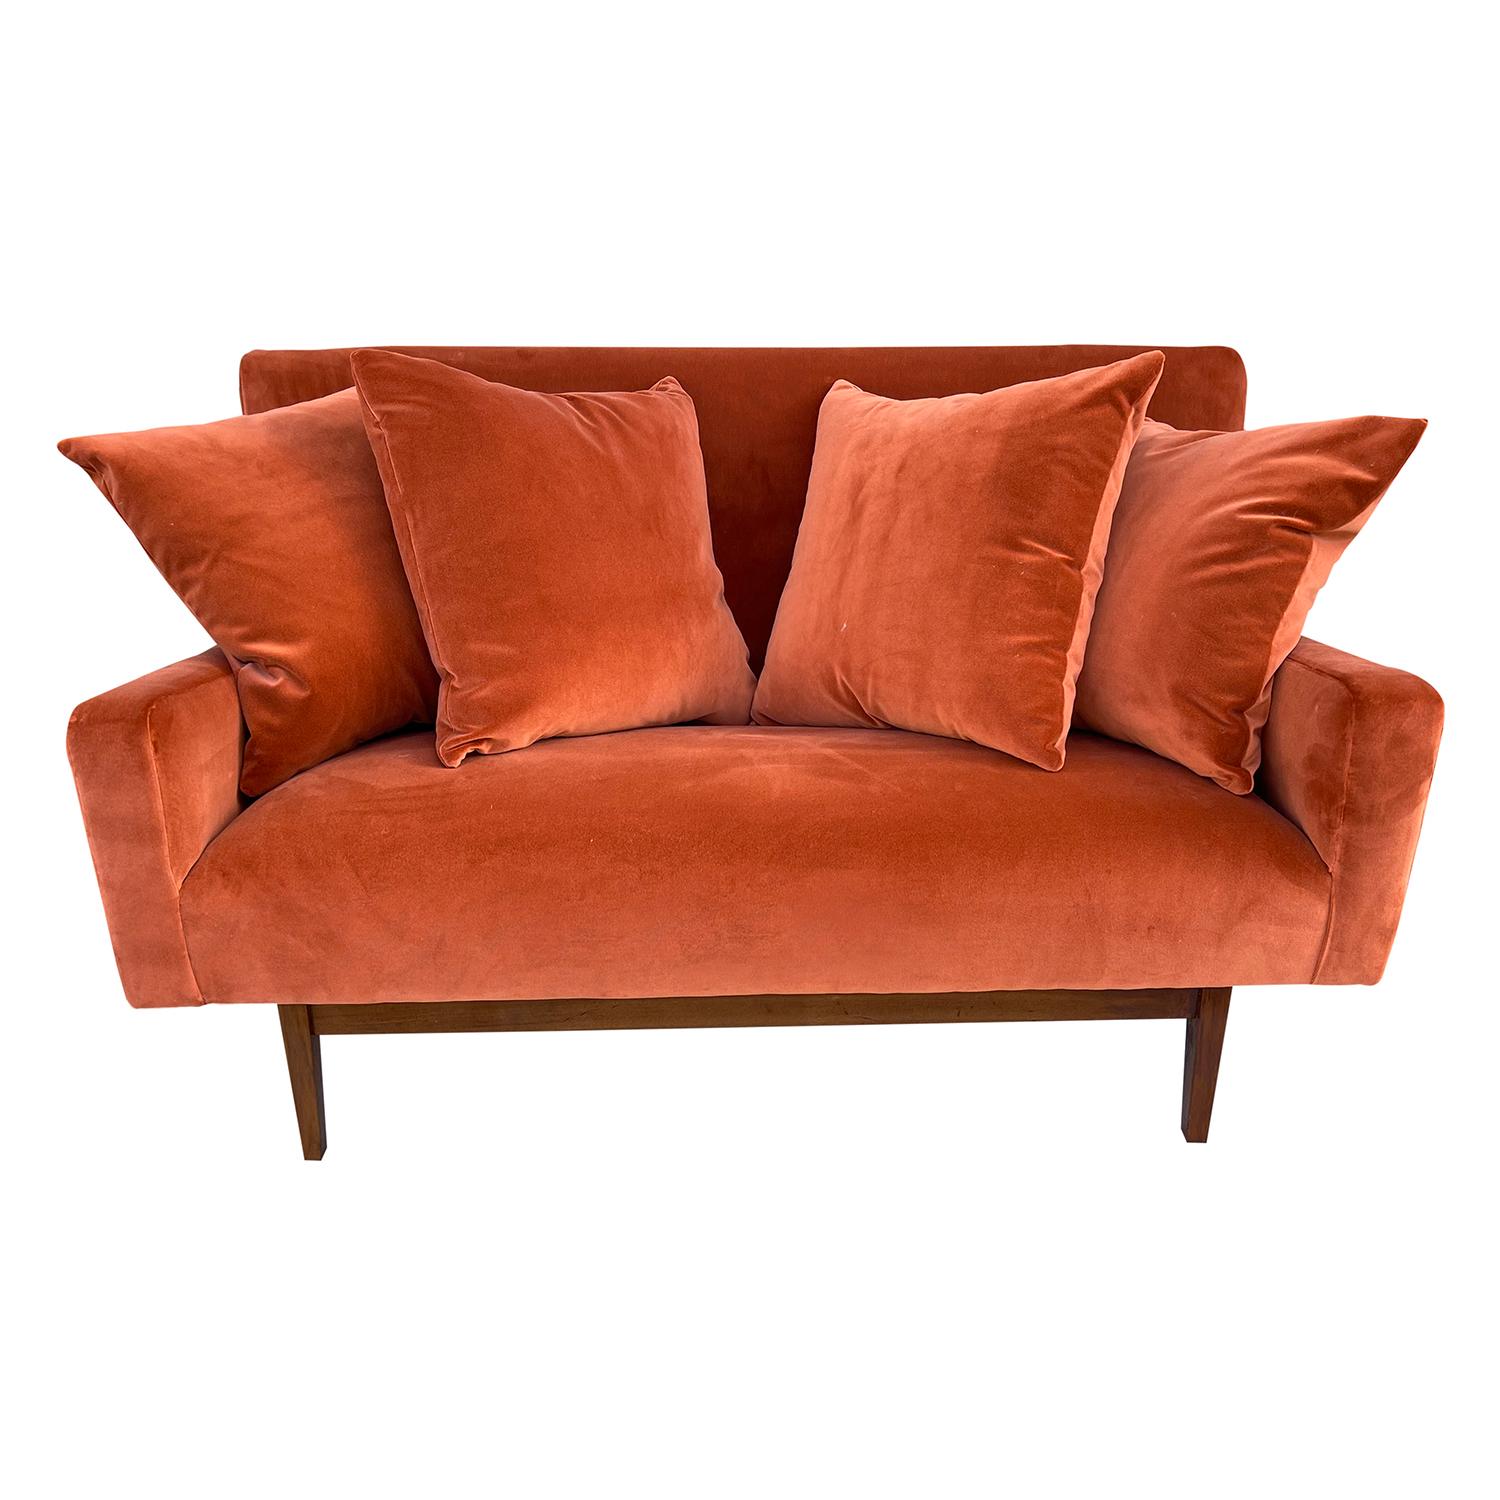 A small, vintage Mid-Century Modern American two seater sofa or settee with four pillows, designed and produced by Jens Risom Design, Model U-151, in good condition. The seat, back rest of the divano is slightly inclinated with a button-tufted back